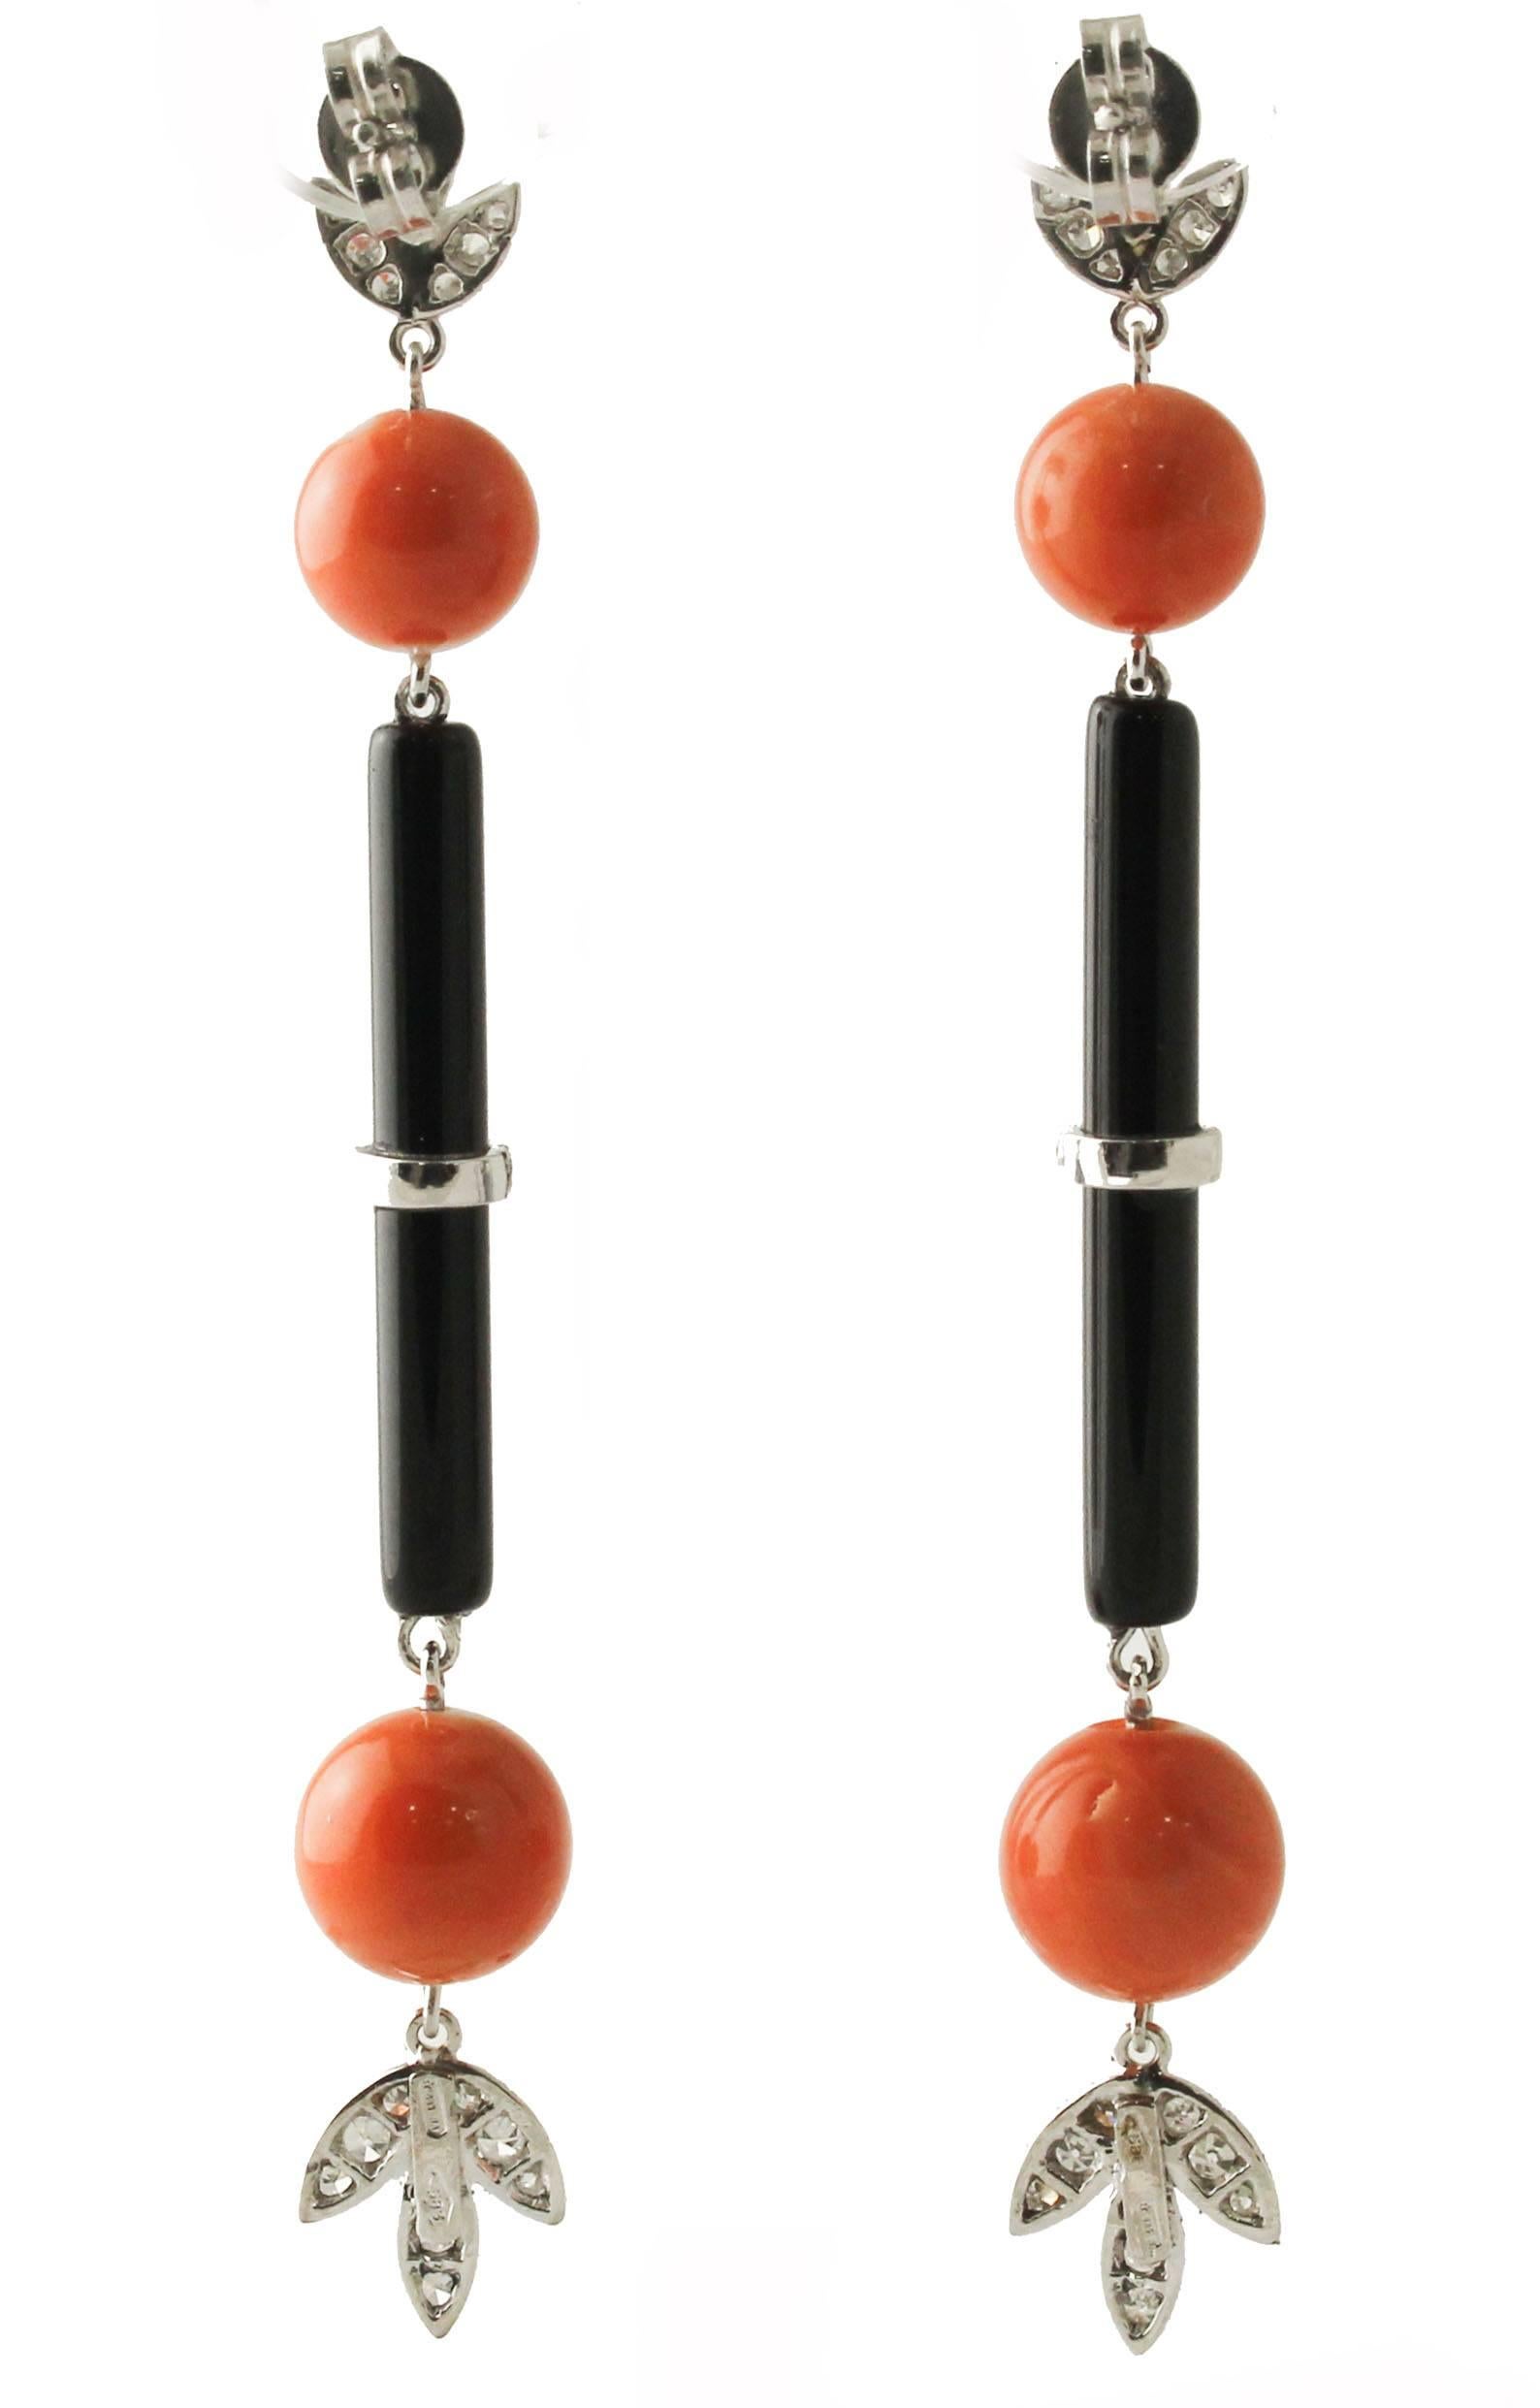 Charming pendant earring, 14 kt white gold, with 0.75 ct diamonds, tubular in onyx g1.80 and coral of g 4.40. Total weight g 9.6.
Diamonds ct 0.75
Onyx g 1.80
Coral g 4.40
Total weight g 9.60
R.F + ugao

For any enquires, please contact the seller